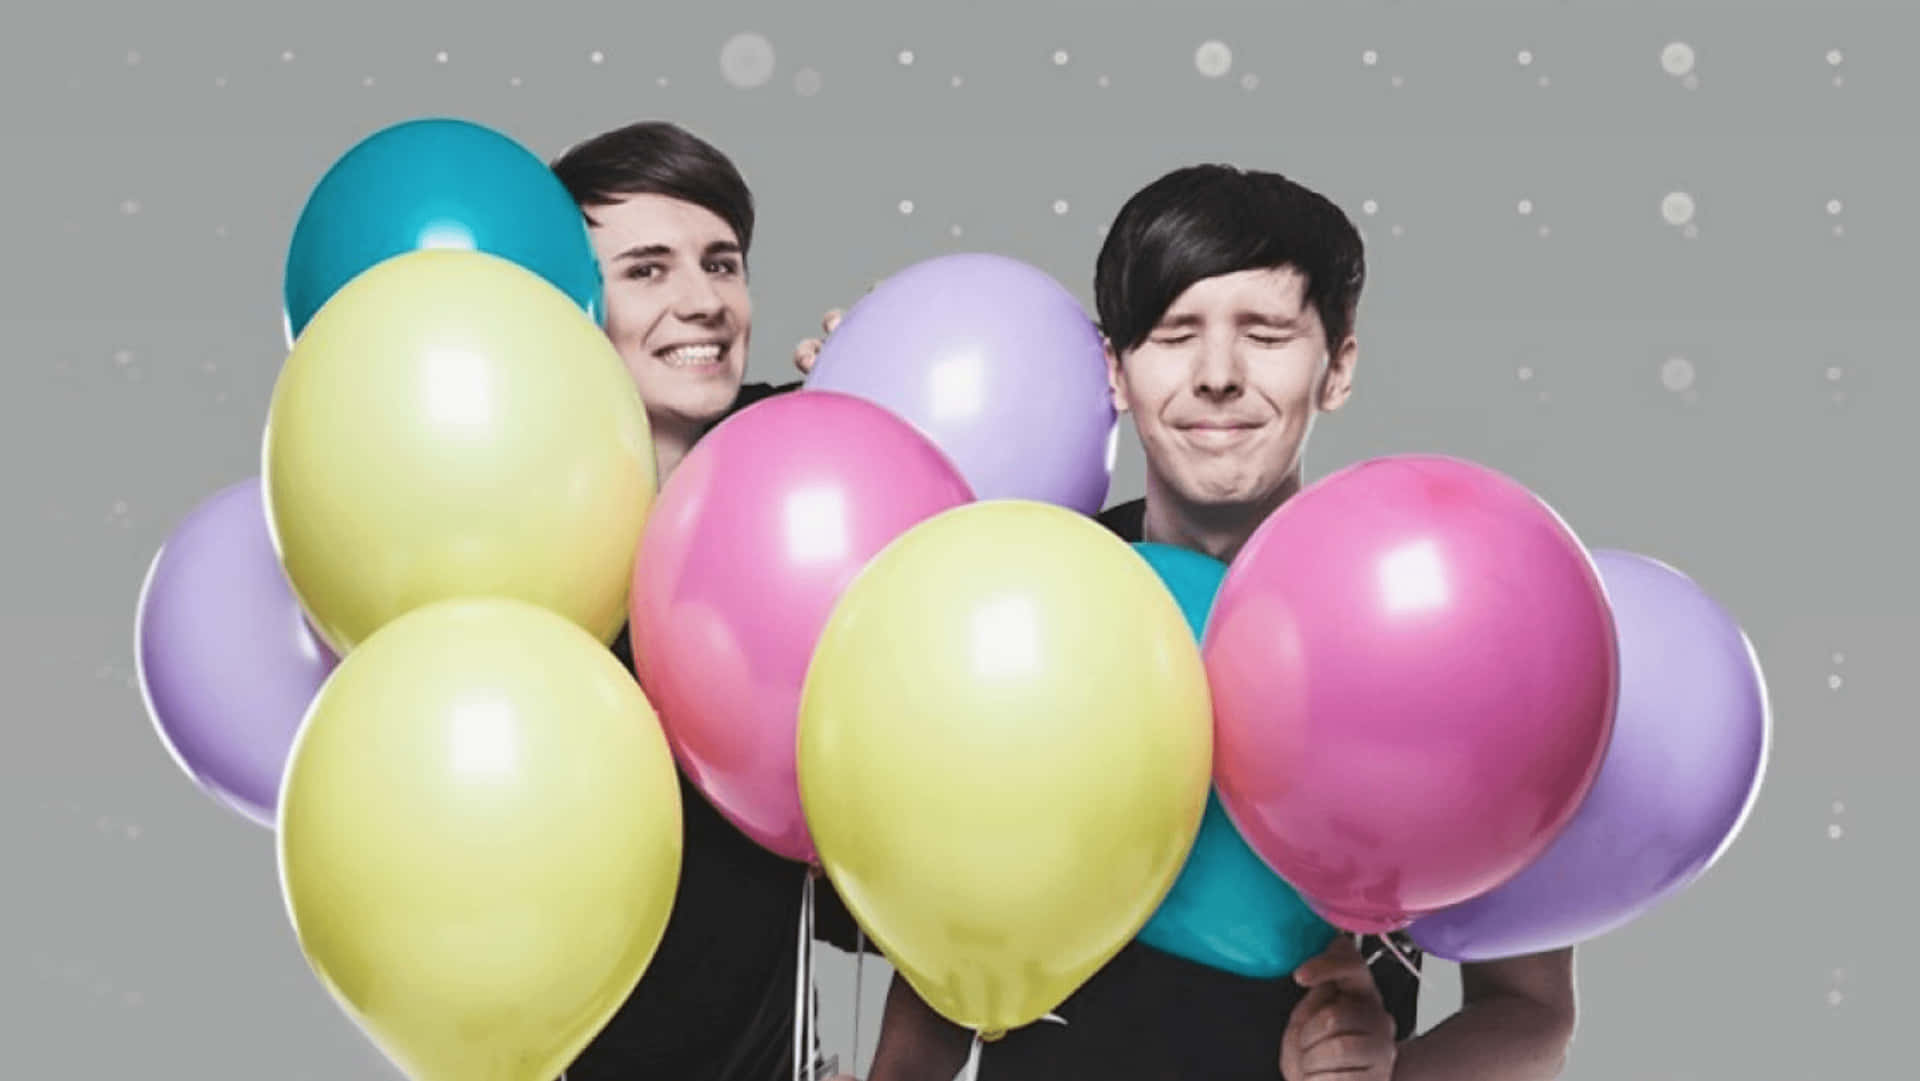 Best friends Dan and Phil bring out the best of each other. Wallpaper